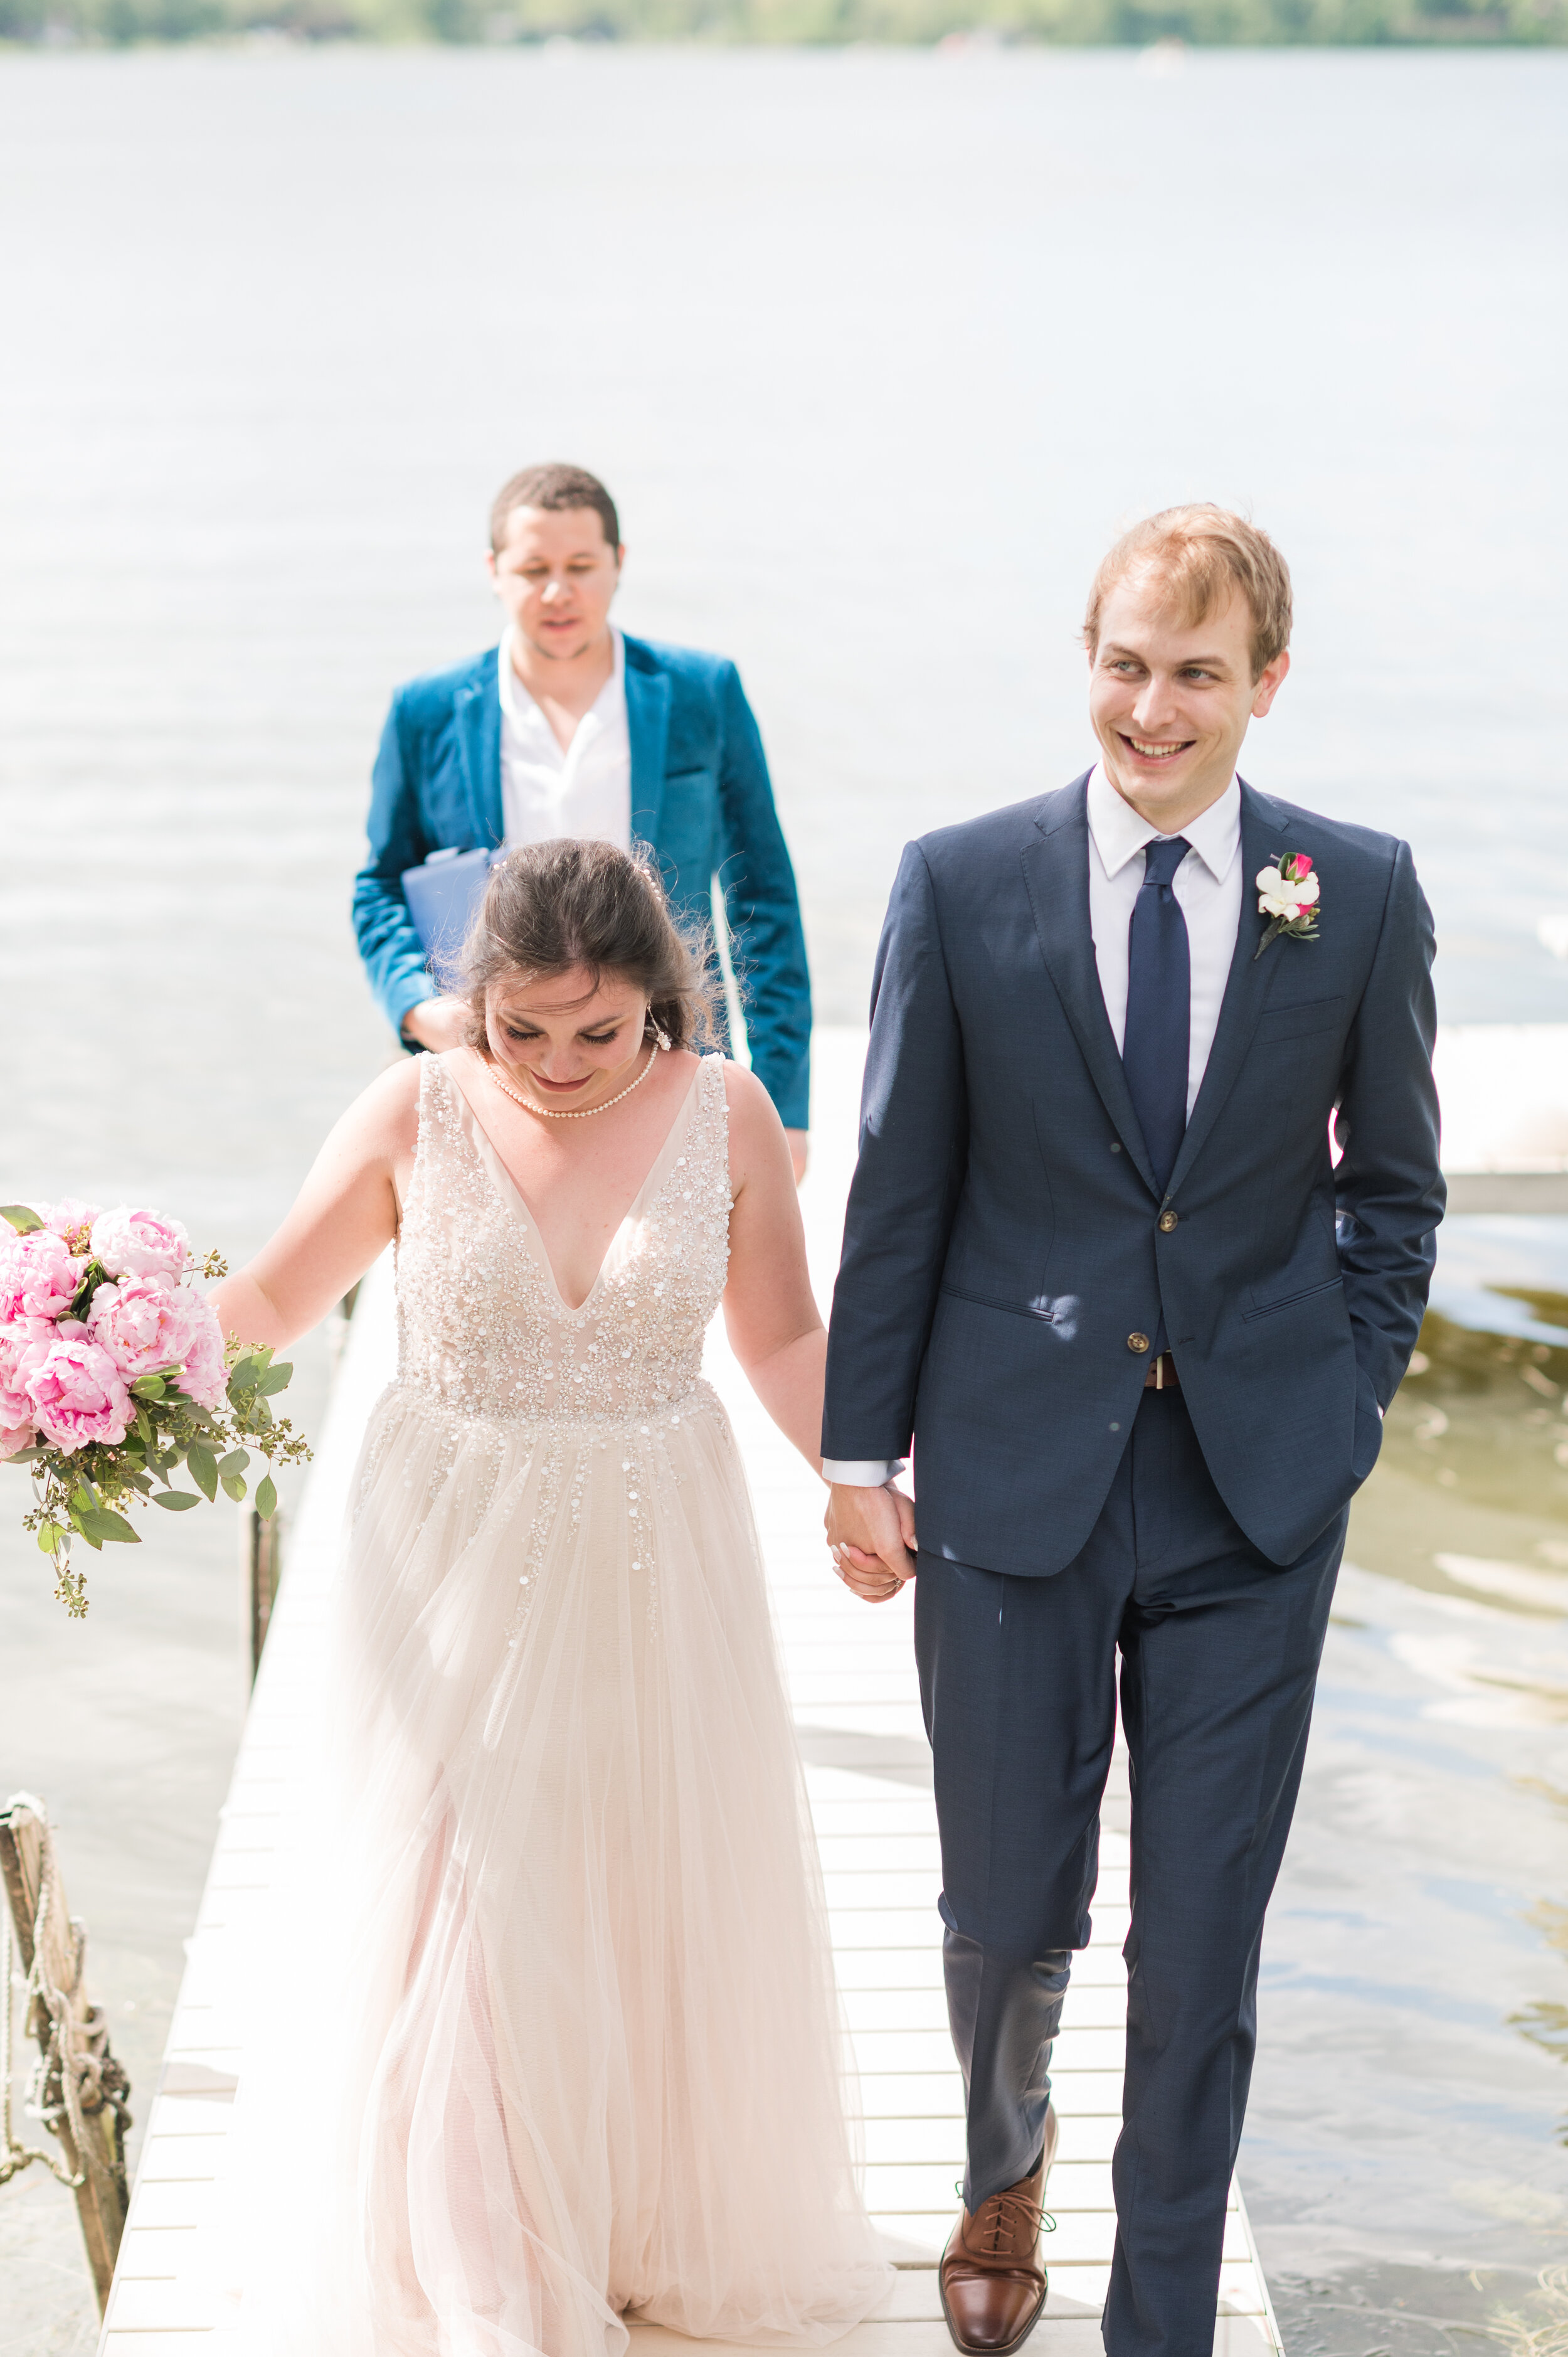 Intimate Round Lake, Illinois Elopement captured by Winterlyn Photography